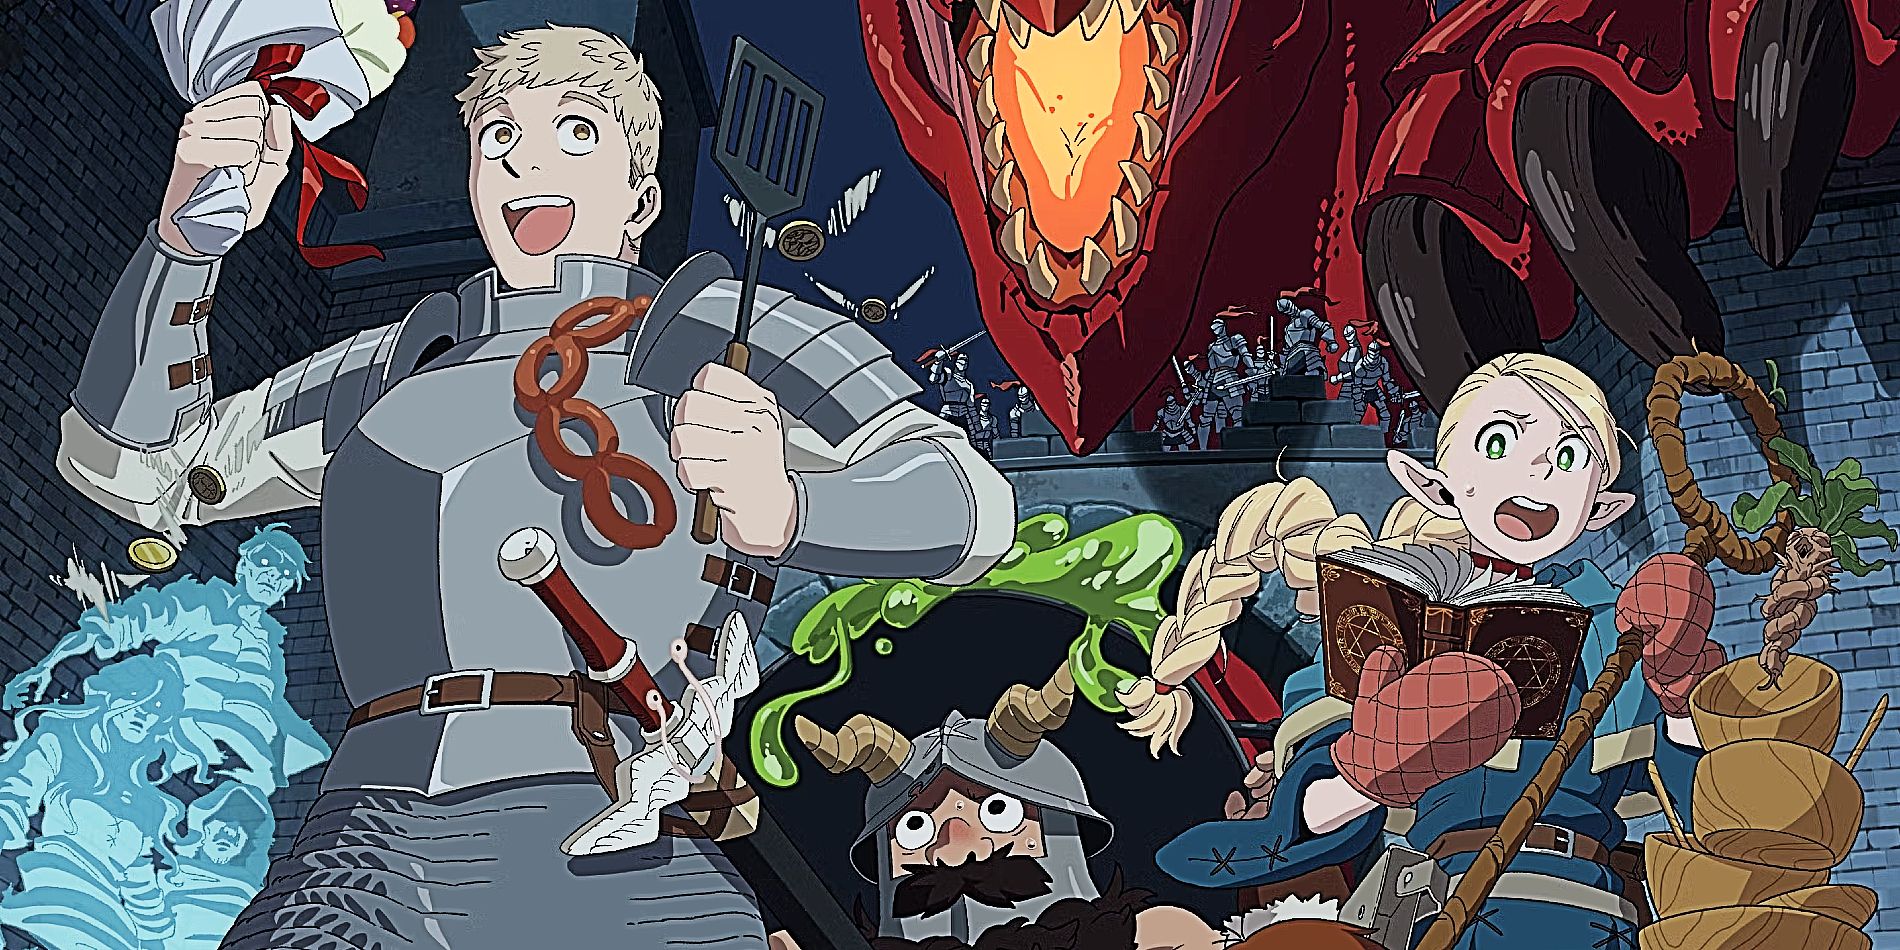 Delicious in Dungeon cast of Laios, Marcille, and Senshi running away from the dragon